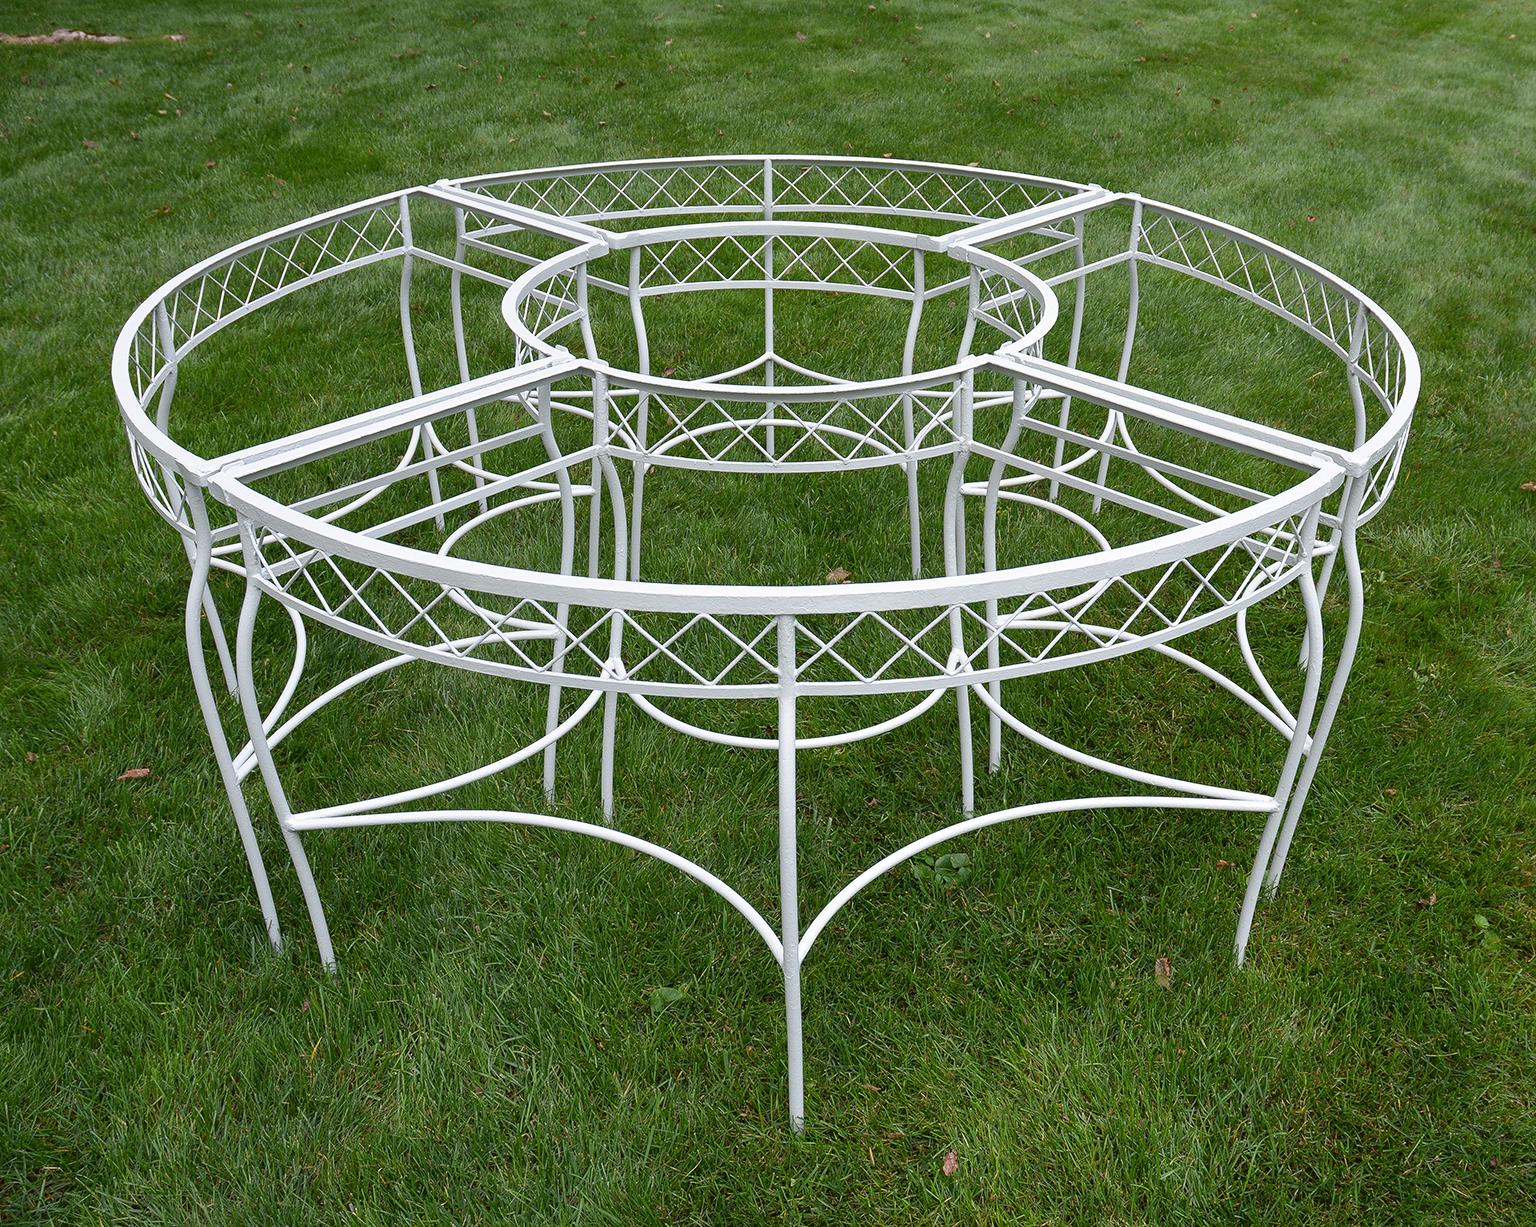 A set of four quarter-circular wrought-iron tables, with glass inserts, grouped in a circle, American, ca. 1940. Some photos taken without glass inserts. A very flexible and useful table that works in so many situations and one that is from a very